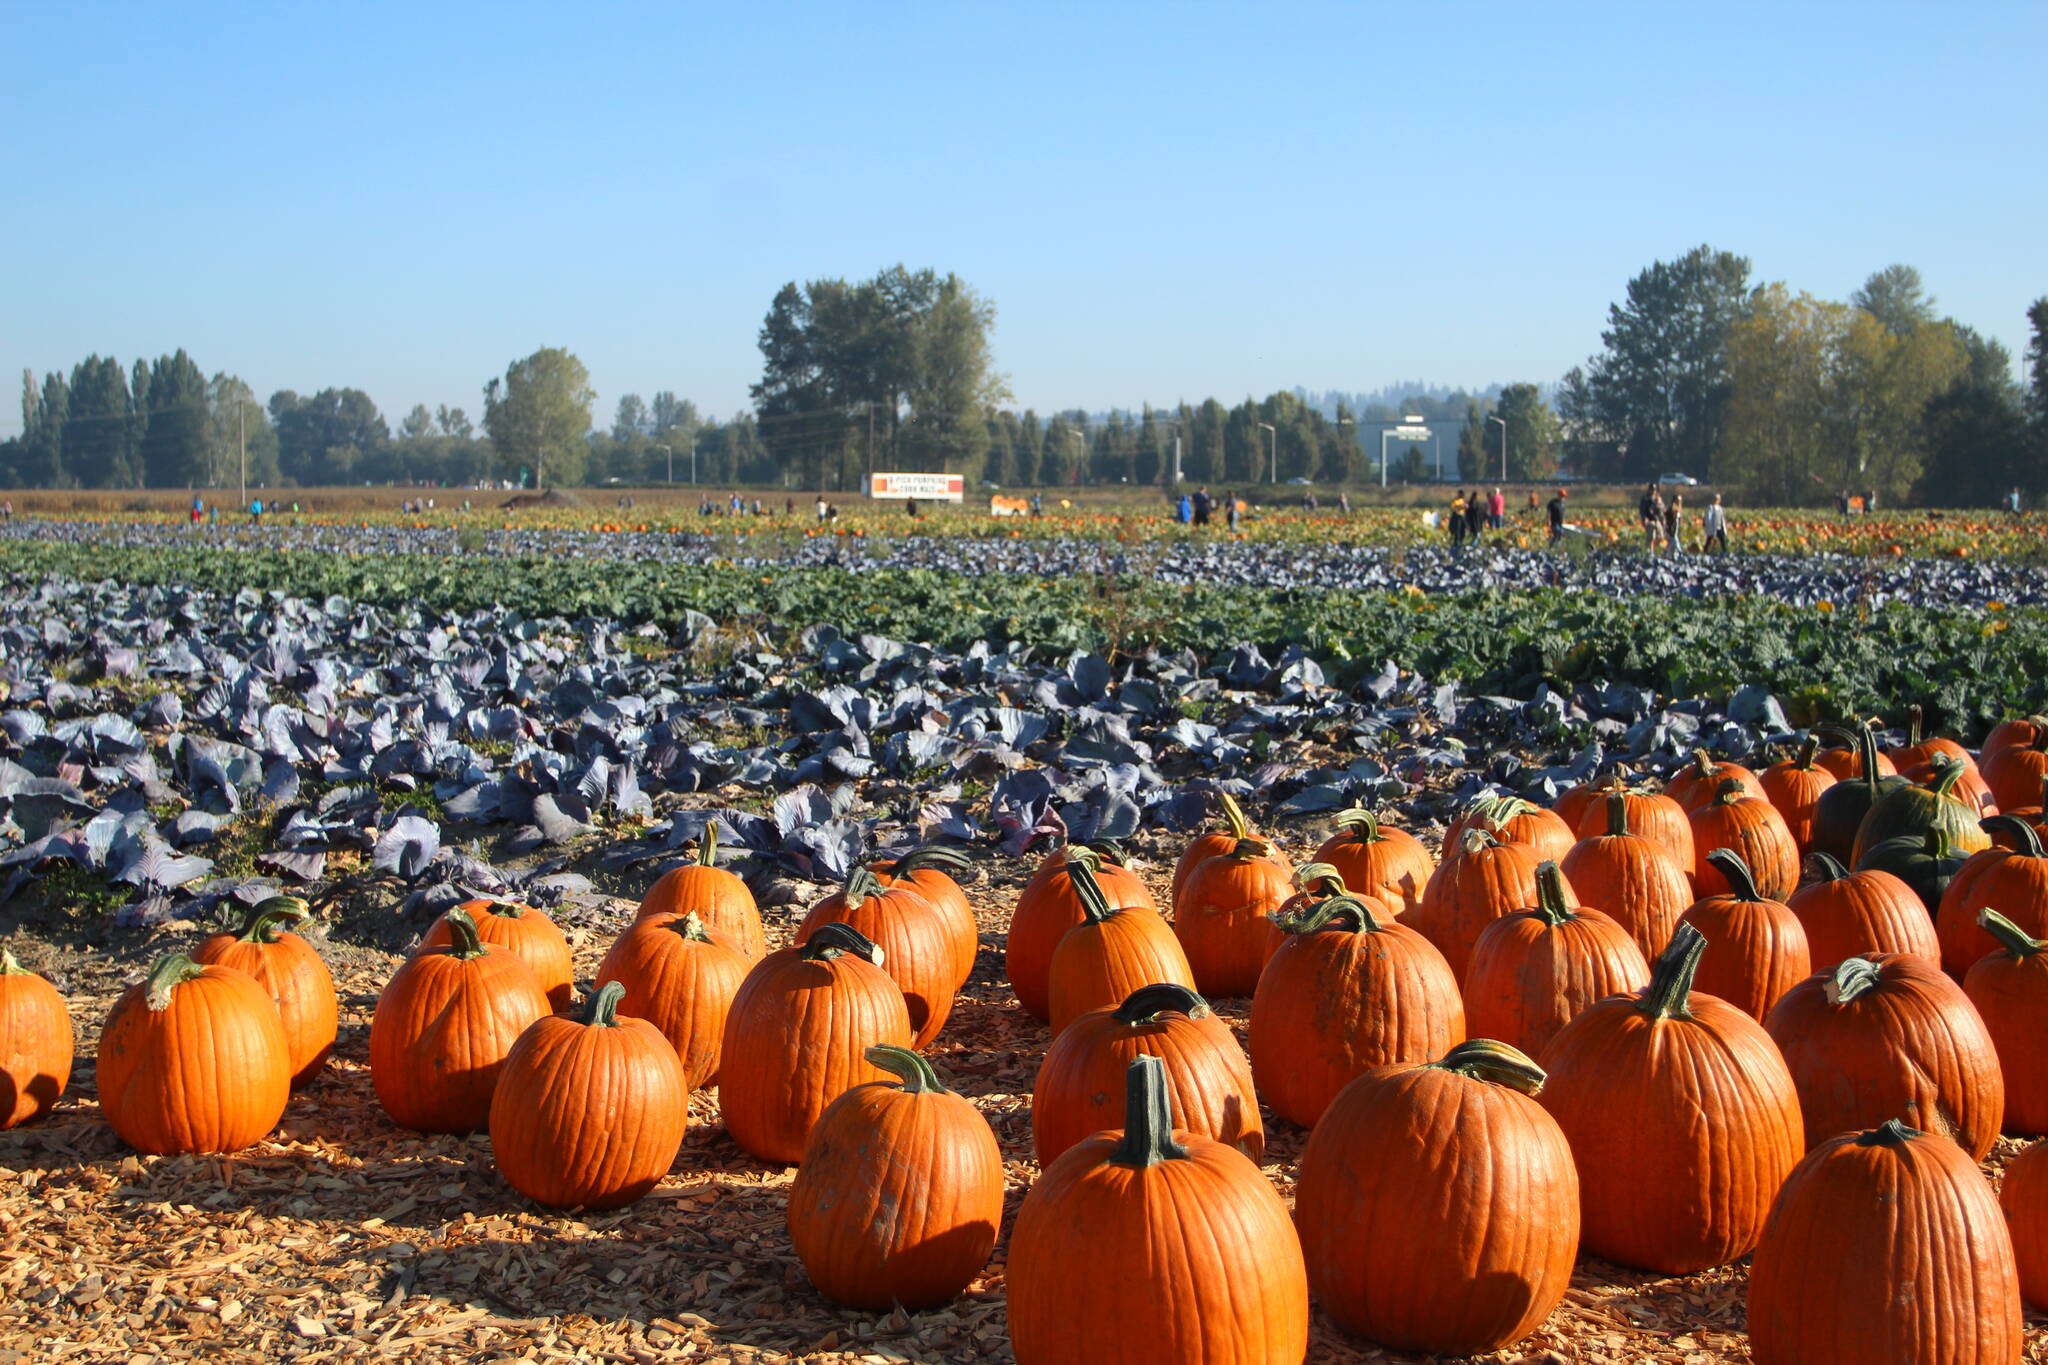 Photos by Olivia Sullivan/Sound Publishing
Pumpkins await visitors at Carpinito Brothers Farm Pumpkin Patch in the Kent Valley.